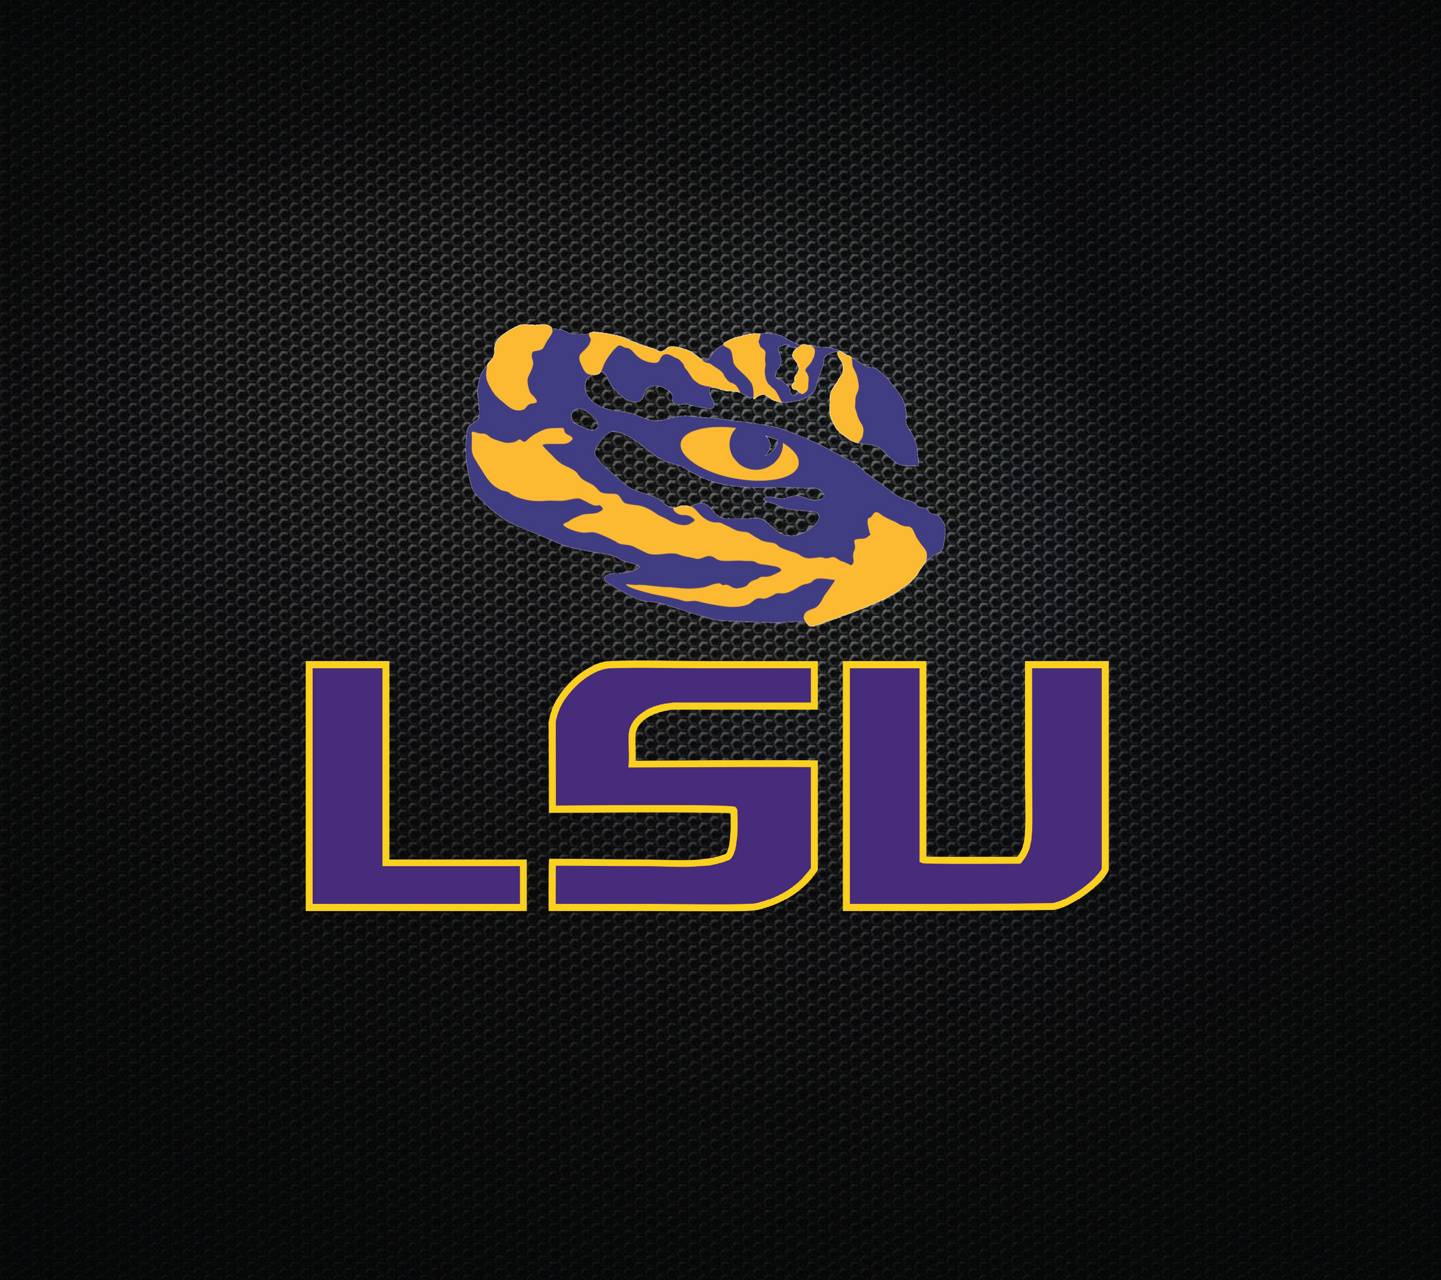 cool live wallpapers cool lsu backgrounds